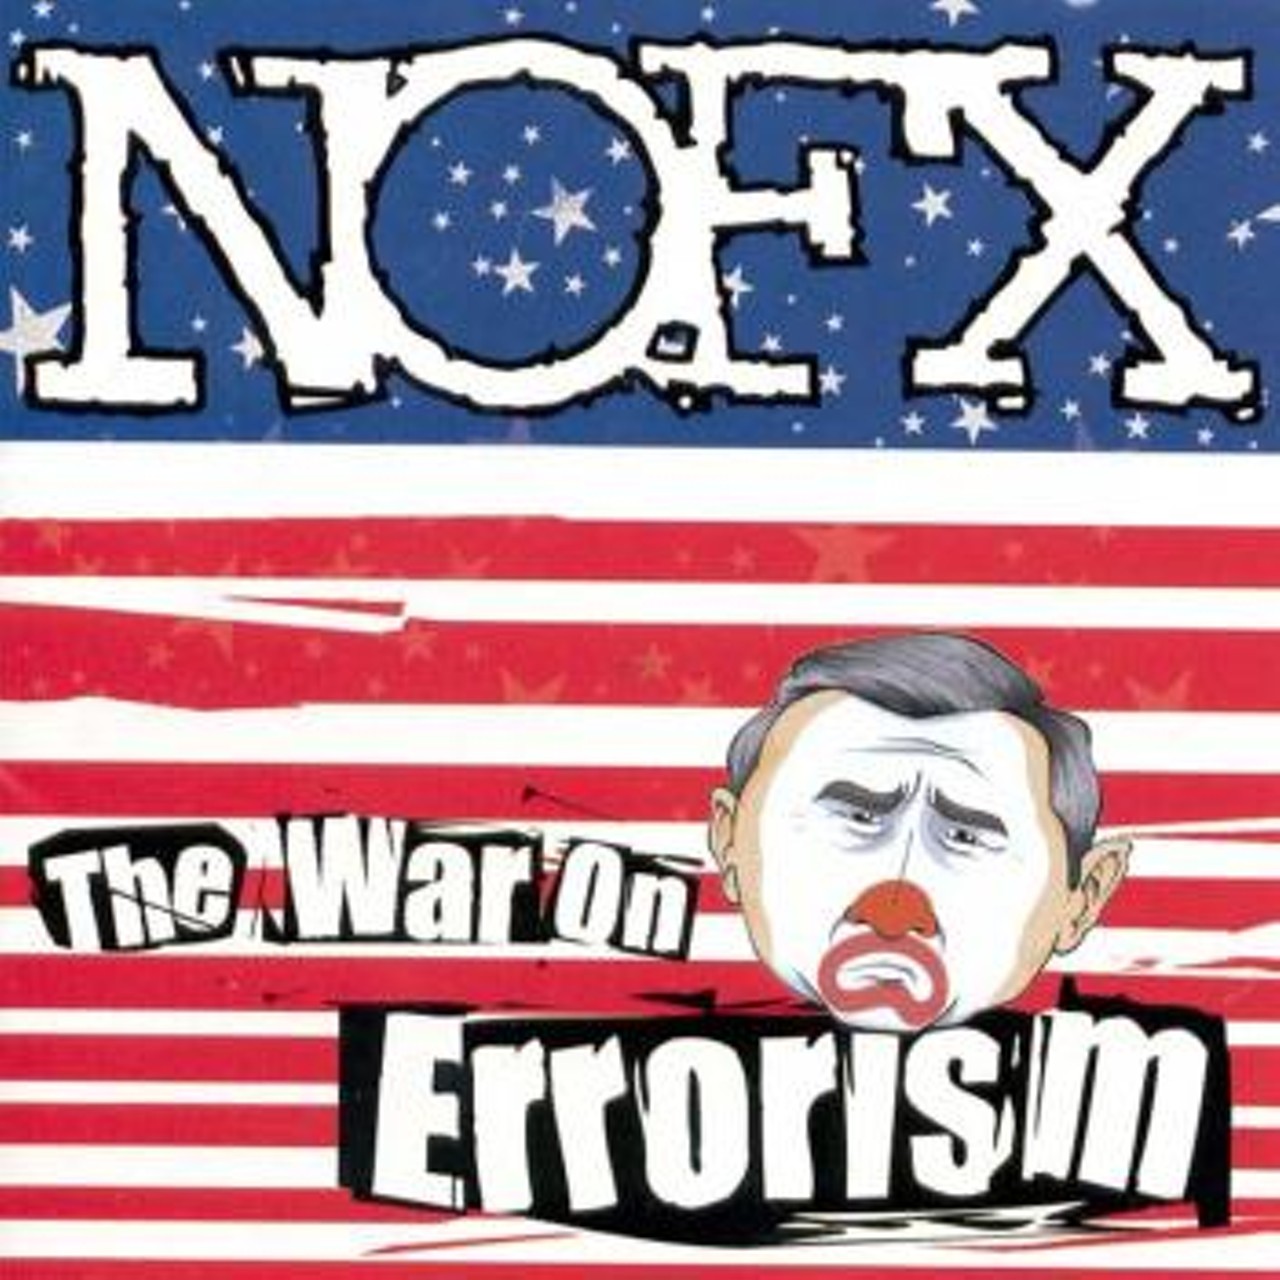 20. OK, taking a swipe at George W (the face that launched a thousand dart boards) is a cheap and easy way to make it into our illustrious Top 20...but his jerkheadness had to figure in here somewhere. So punk rockers NOFX are on the list for the cover of "The War on Errorism," which depicts the president as a cartoony clown. The back of the inlet reads: "Somewhere in Texas there is a village without its idiot." Ya sure know how to elect 'em, America.